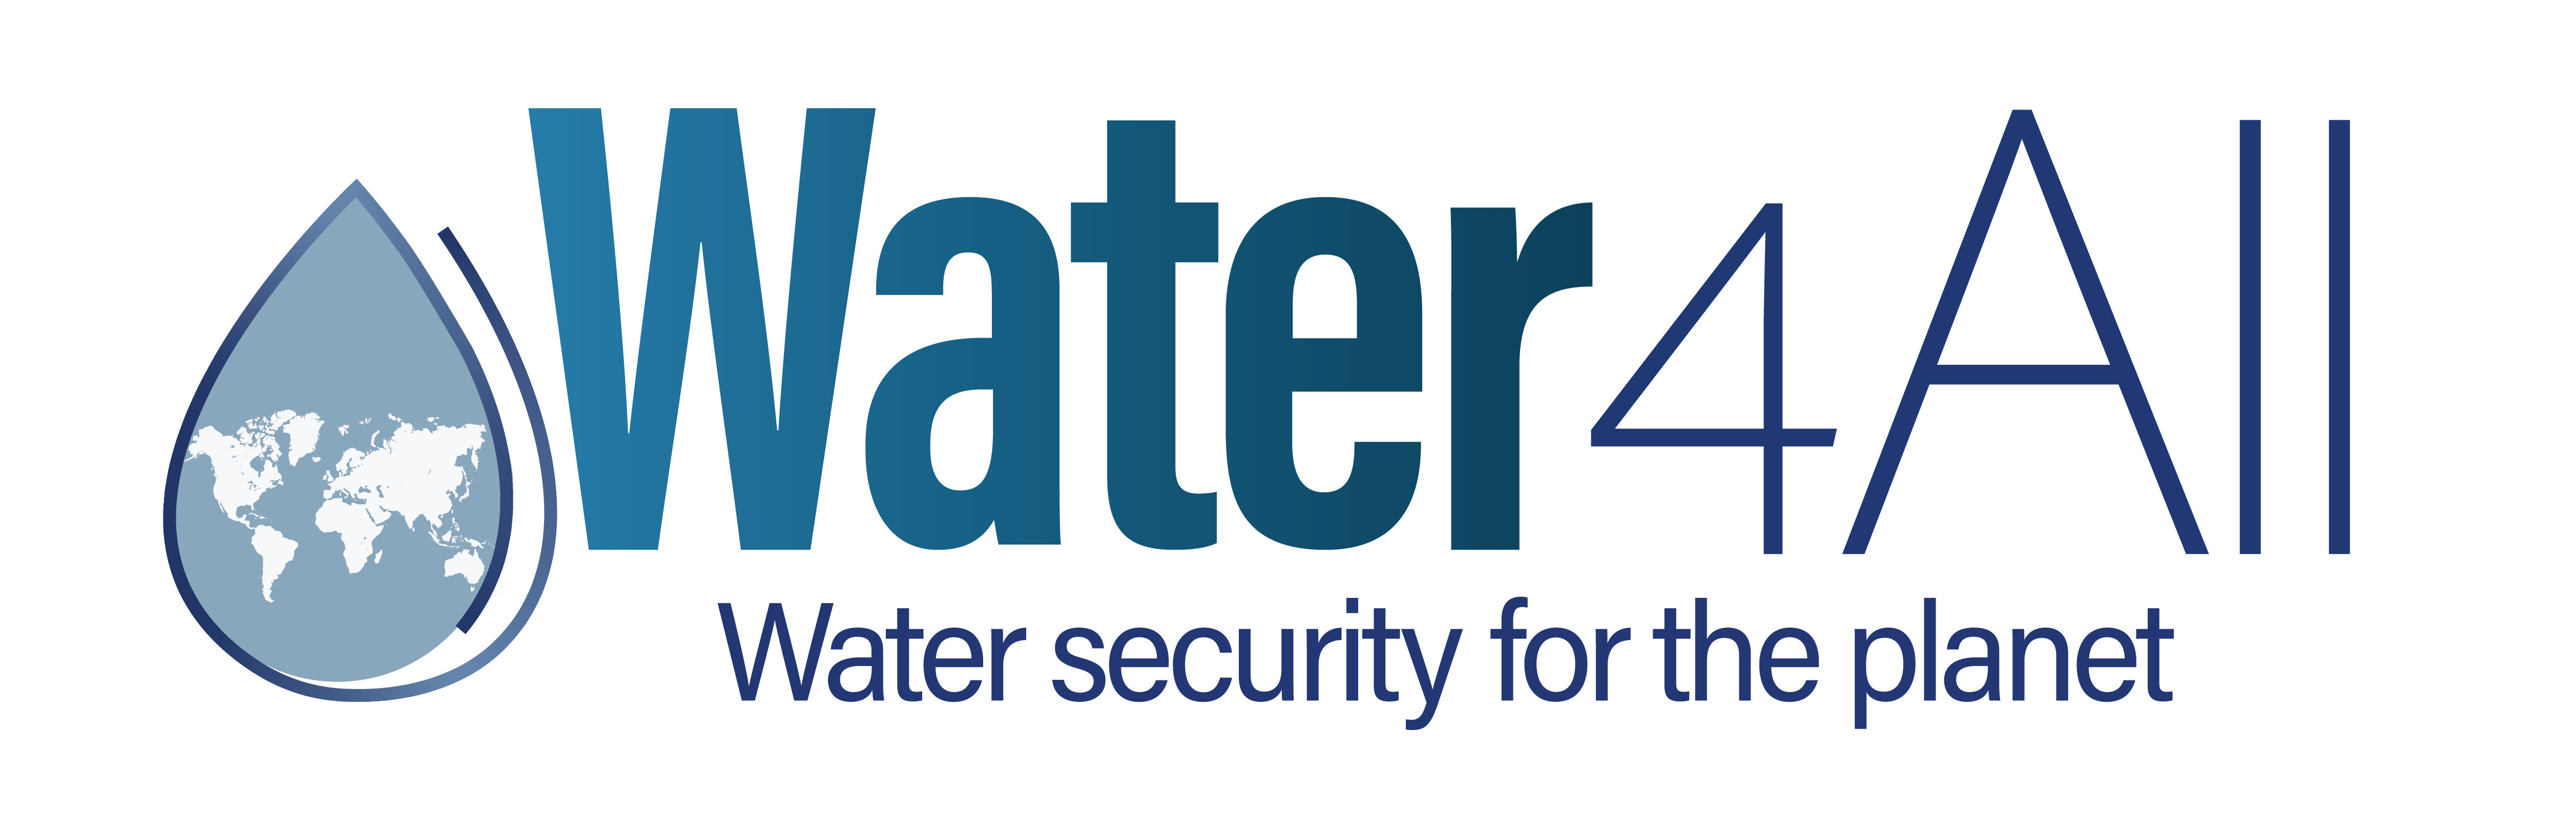 water4all_logo-ok.png